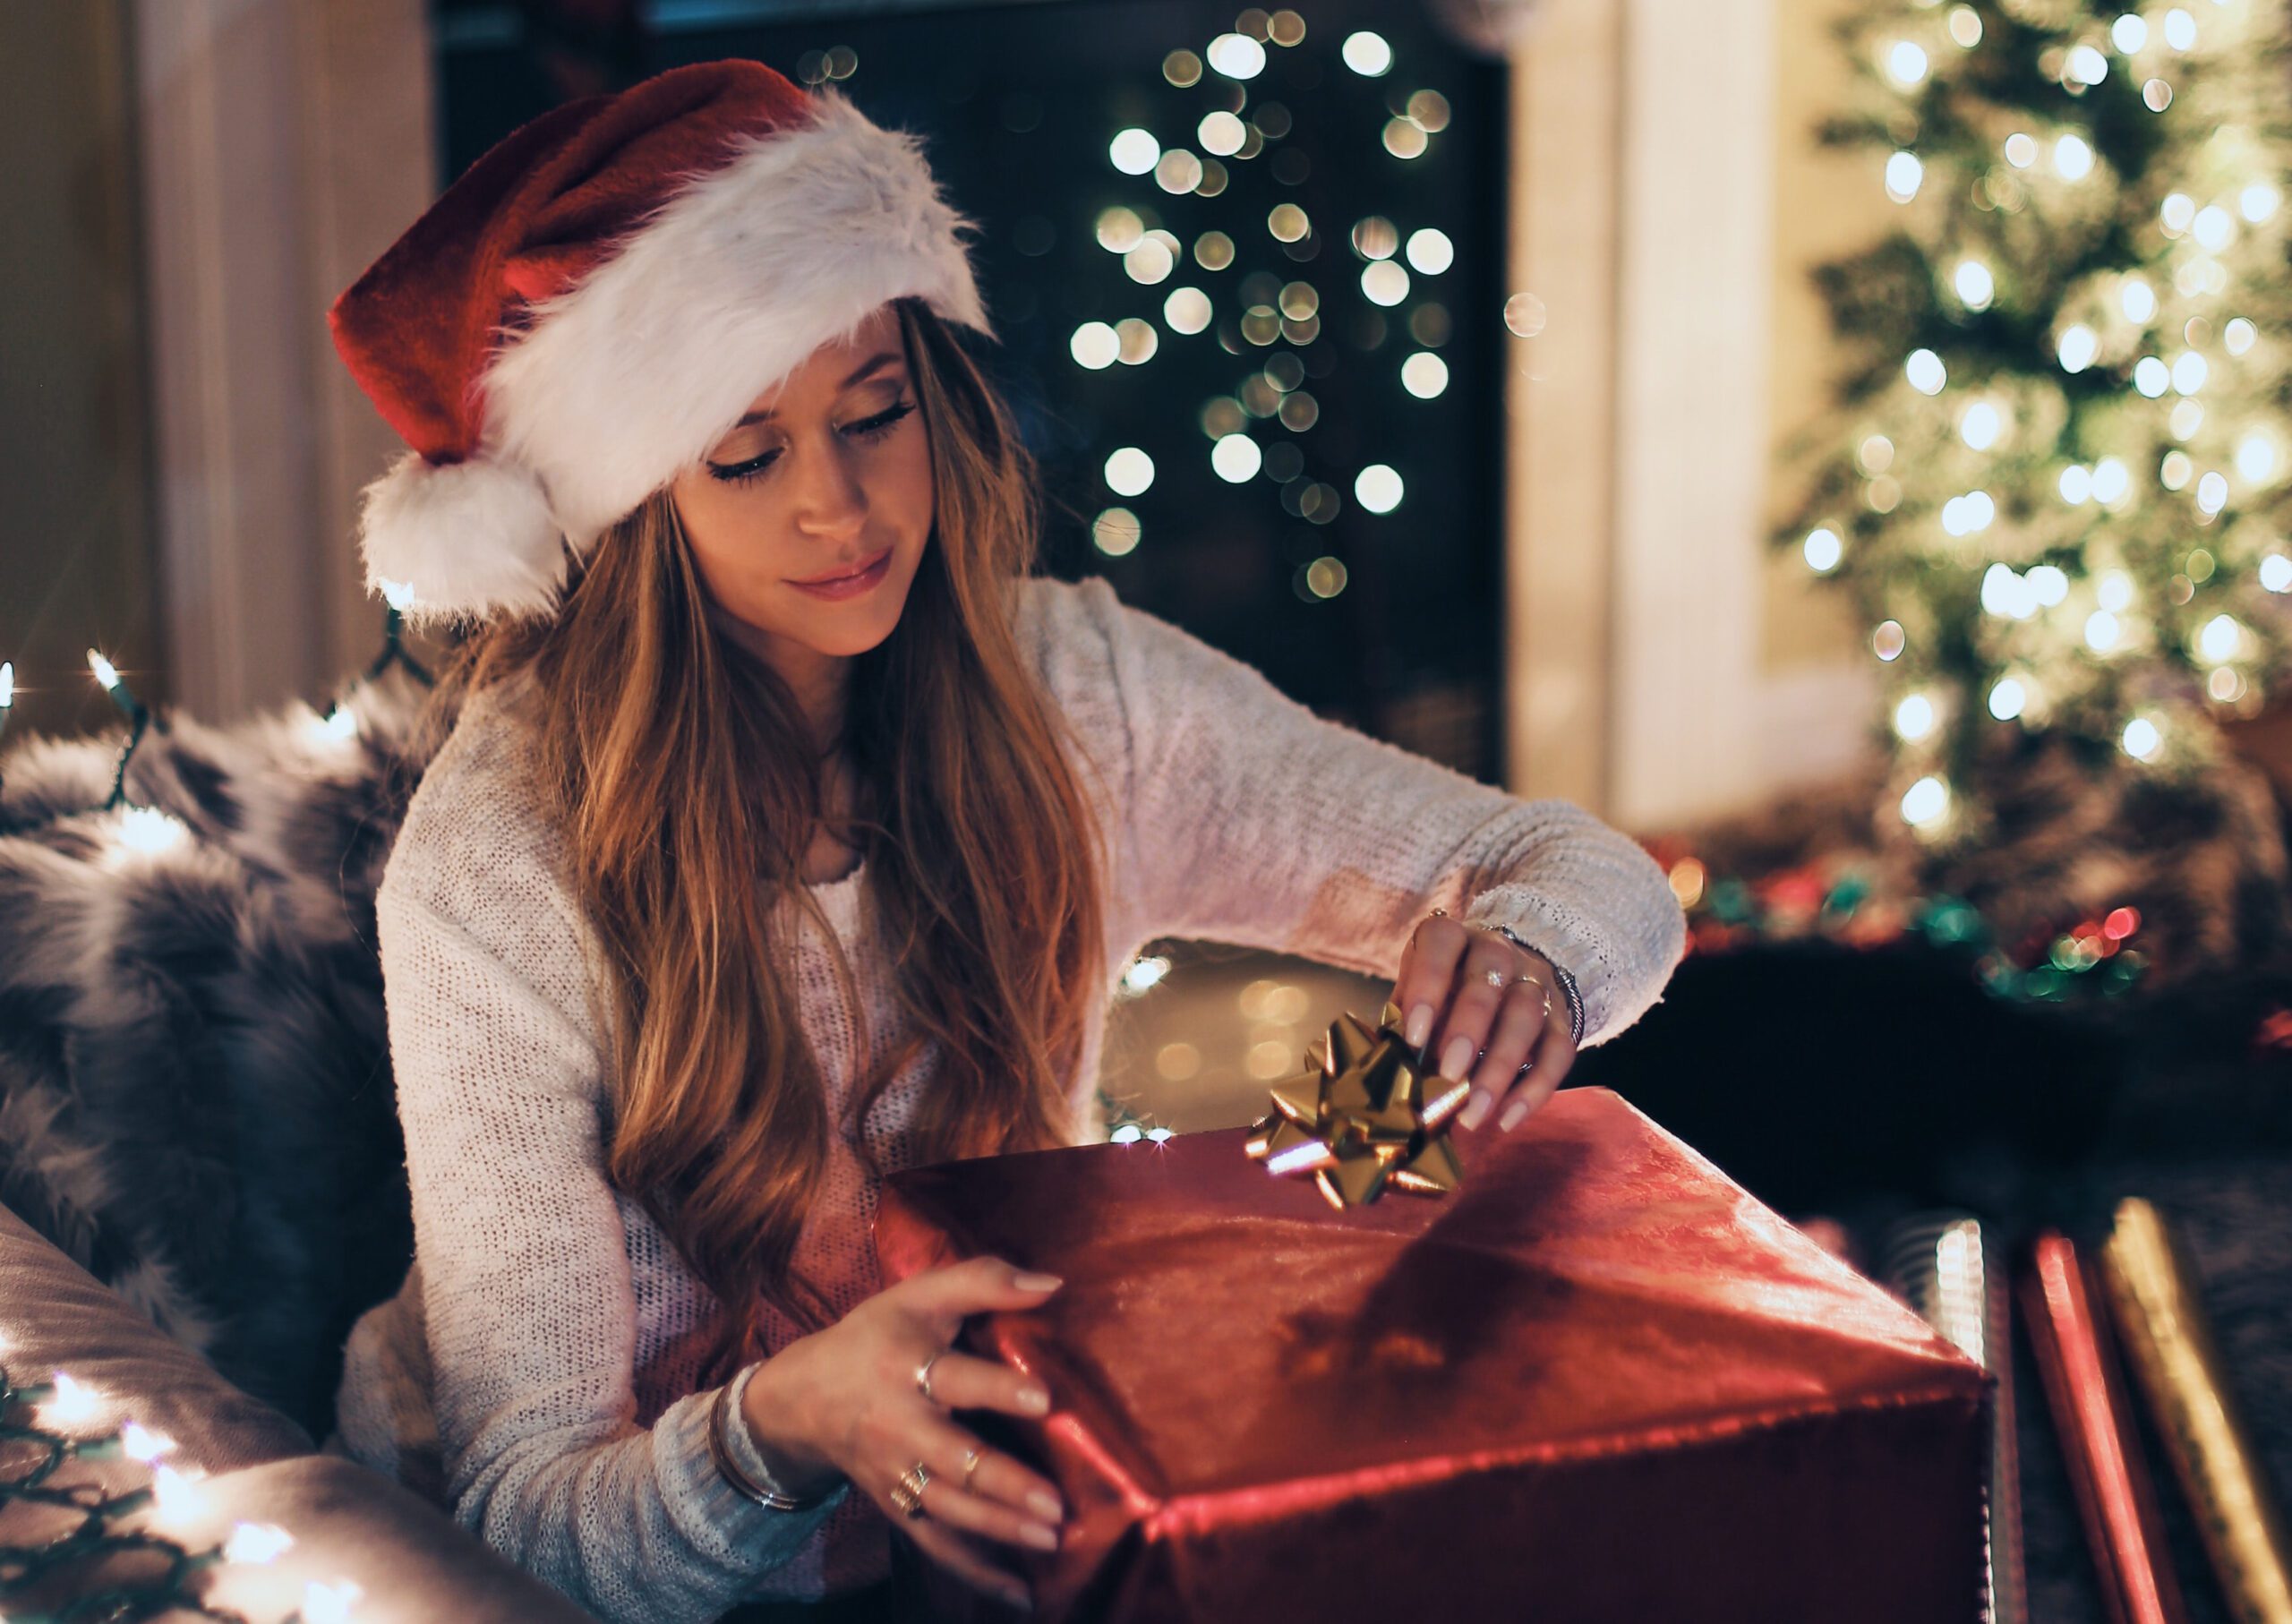 Researchers find the worst reason to give a gift